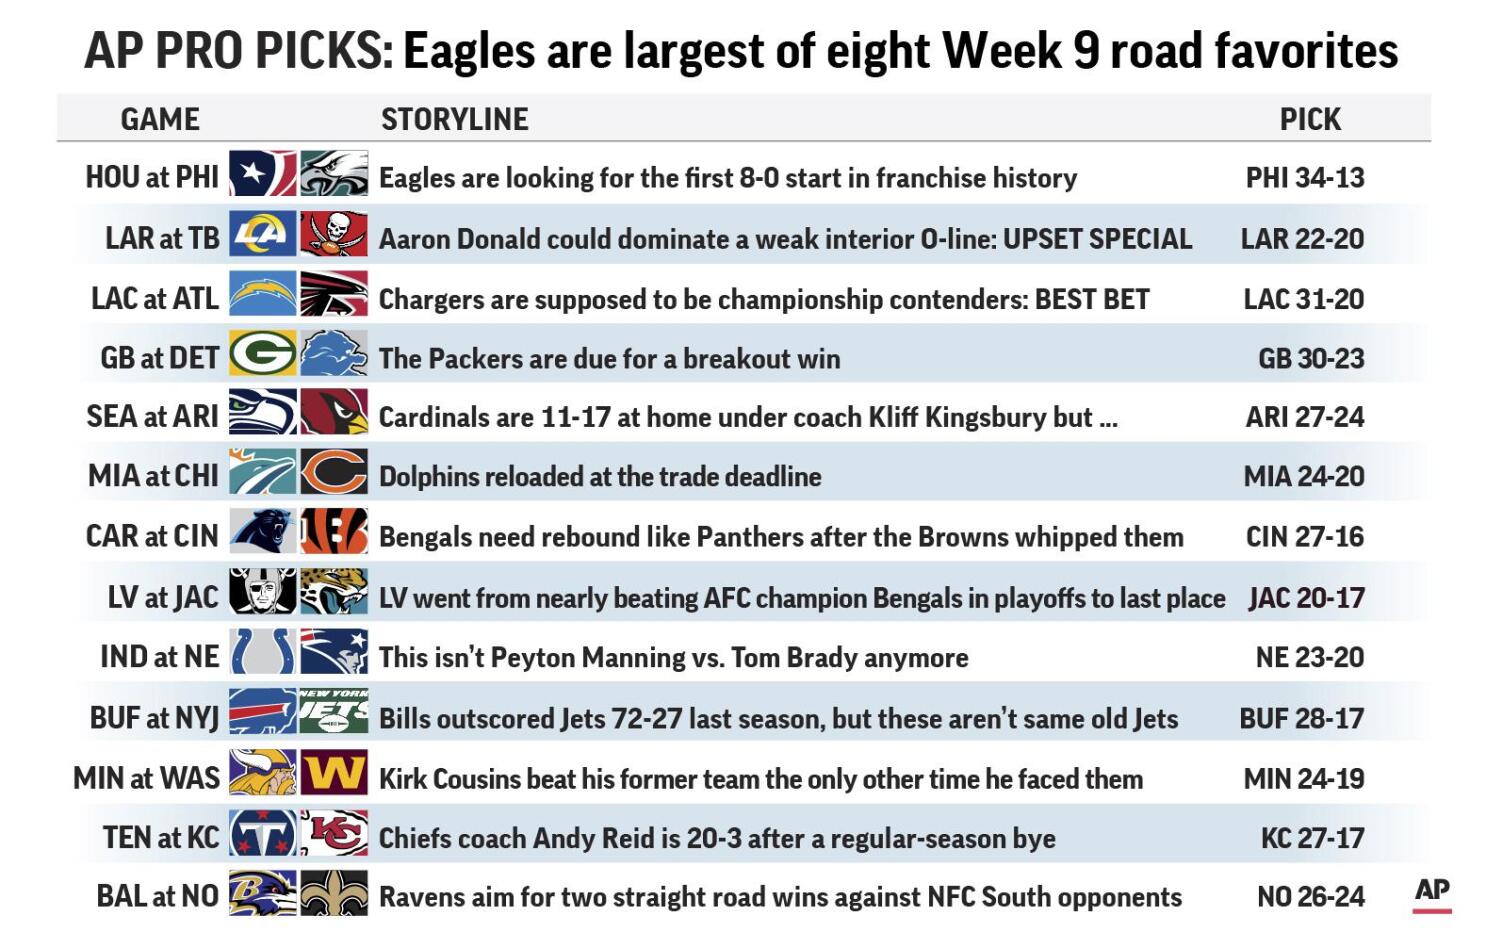 Eagles are largest of 8 road favorites in Week 9